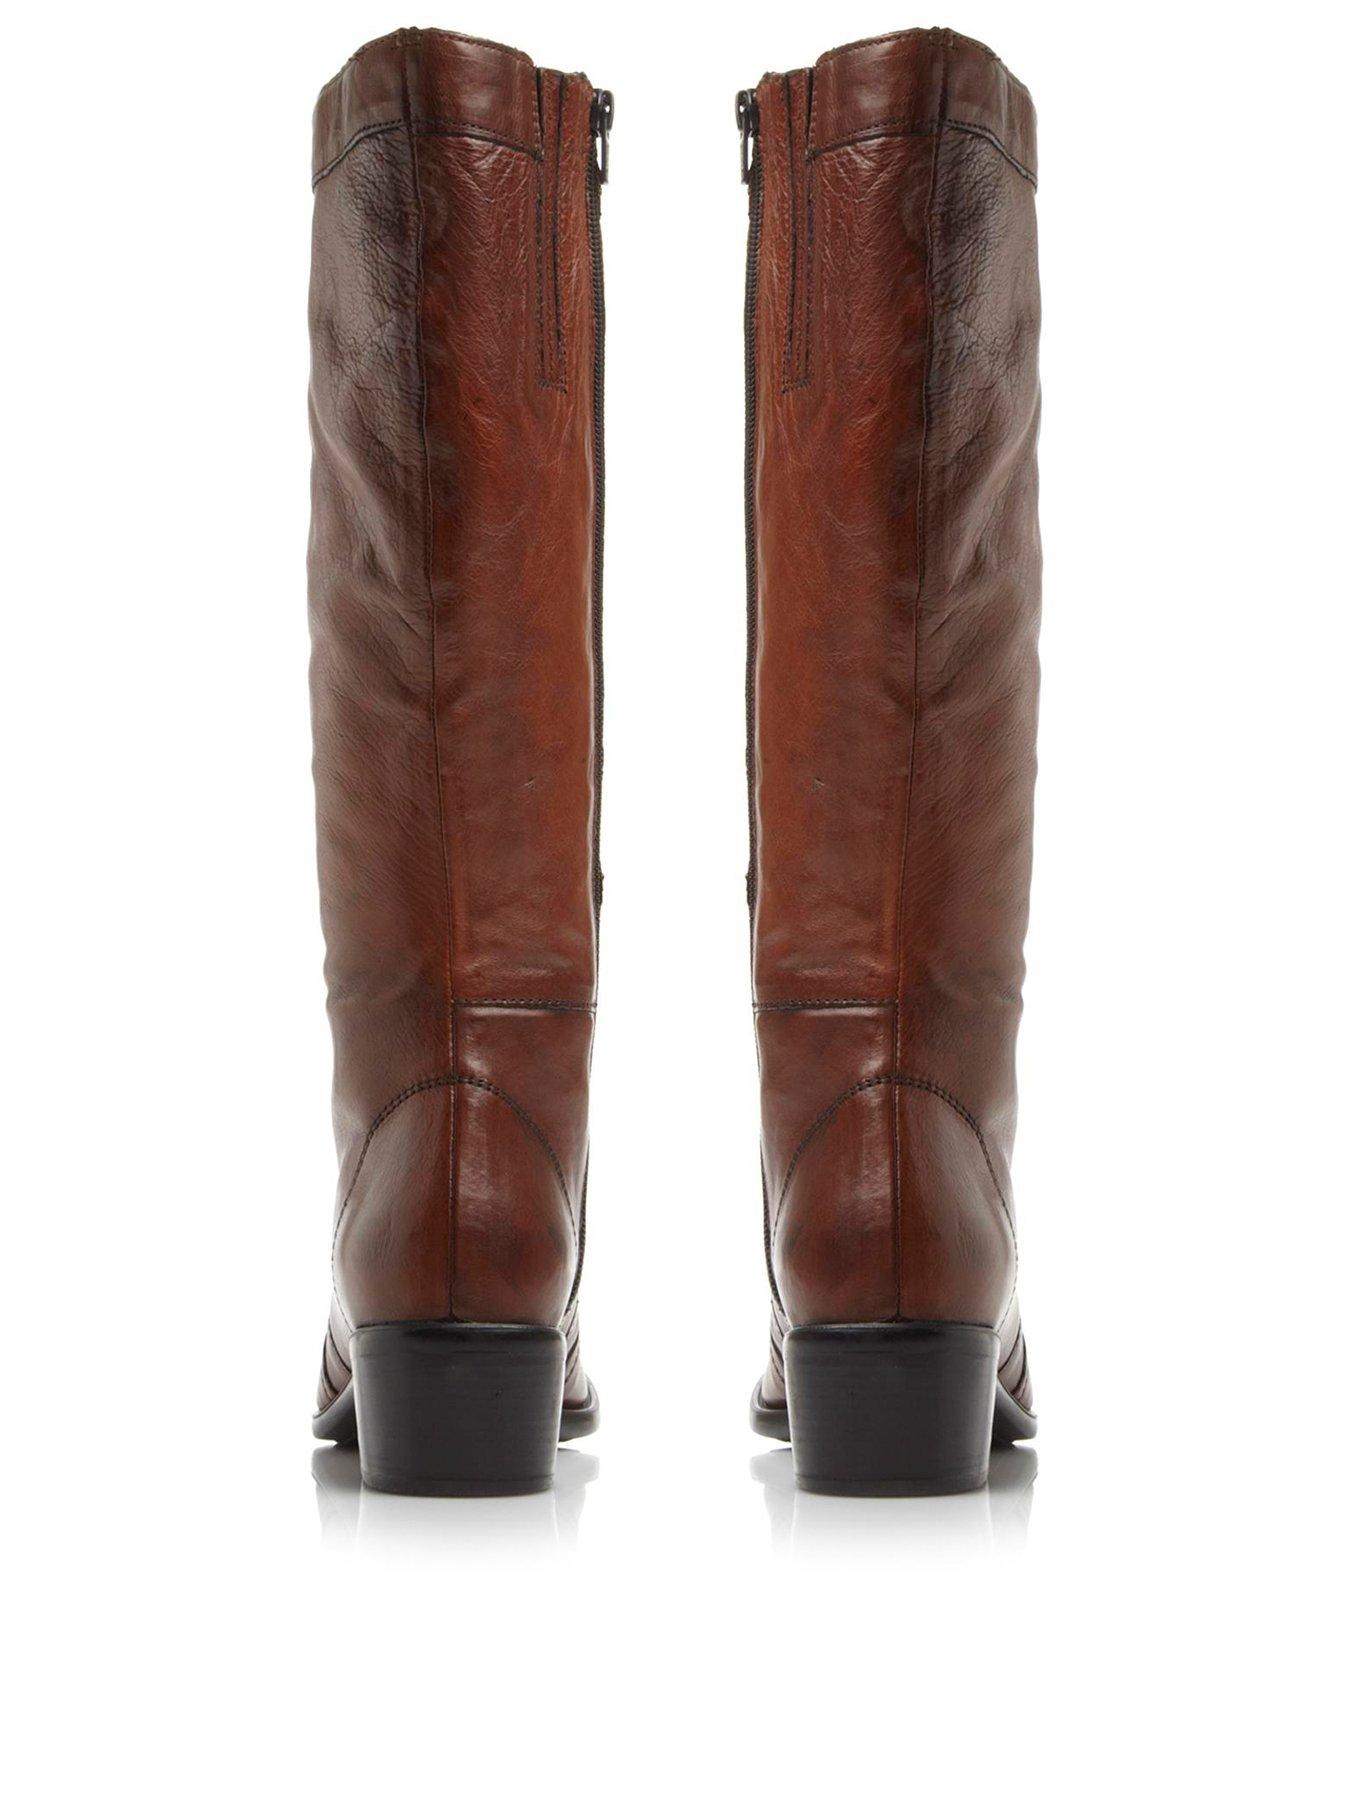  Pixied Button Detail Leather Knee High Boot - Tan